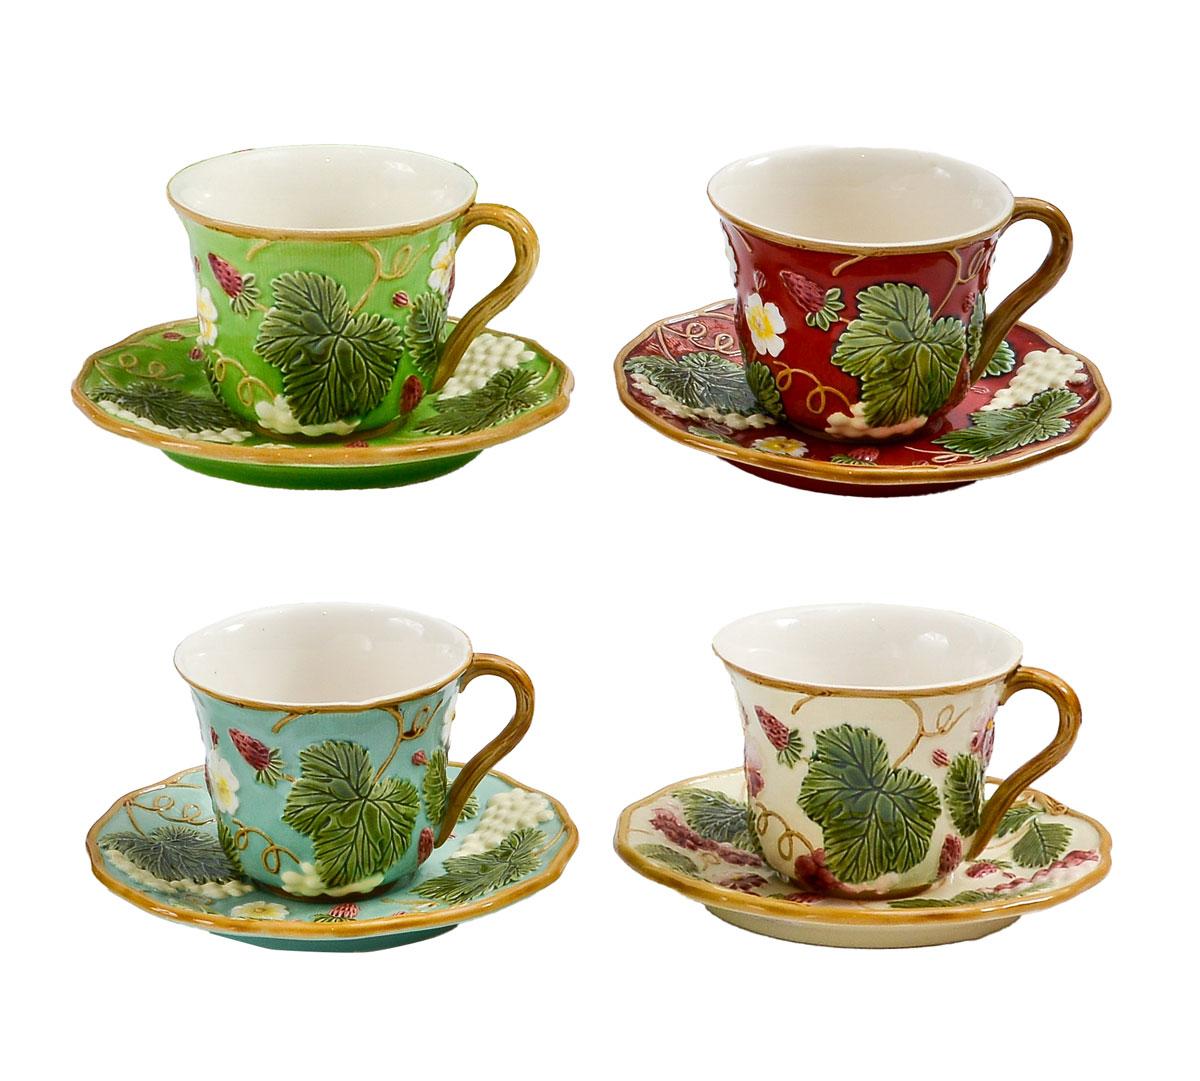 Contemporary Flowery Tea Cups for 2 